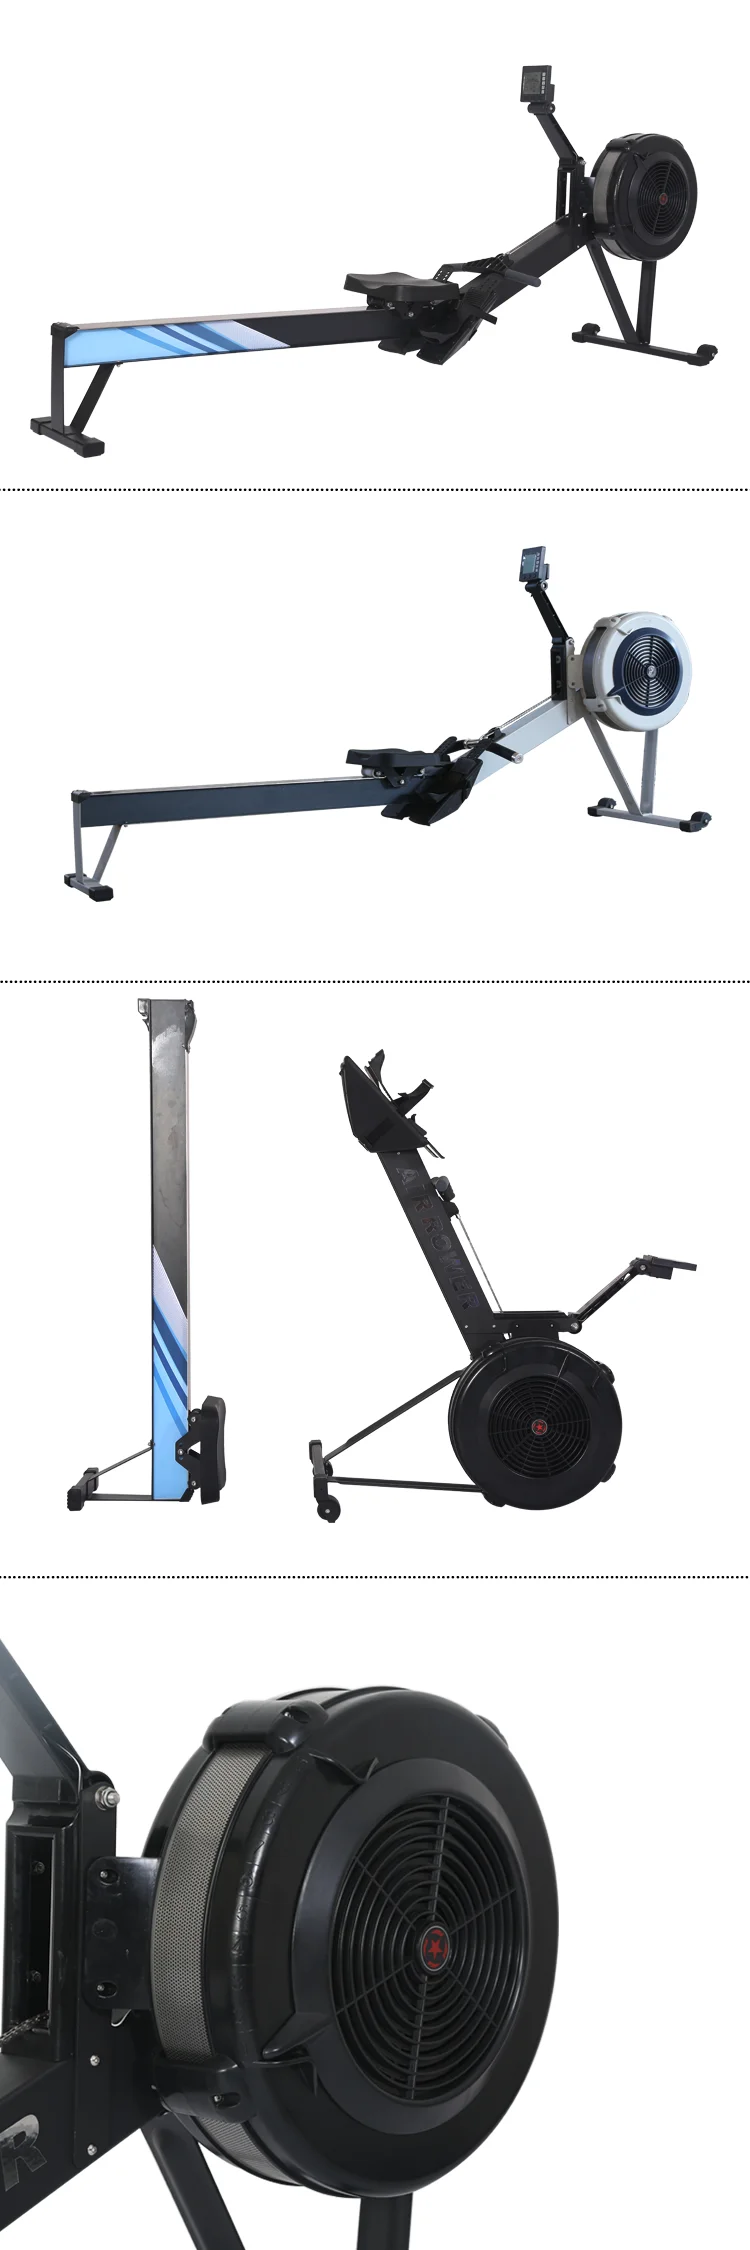 Fitness equipment rowing machine foldable home/outdoor air rowing machine